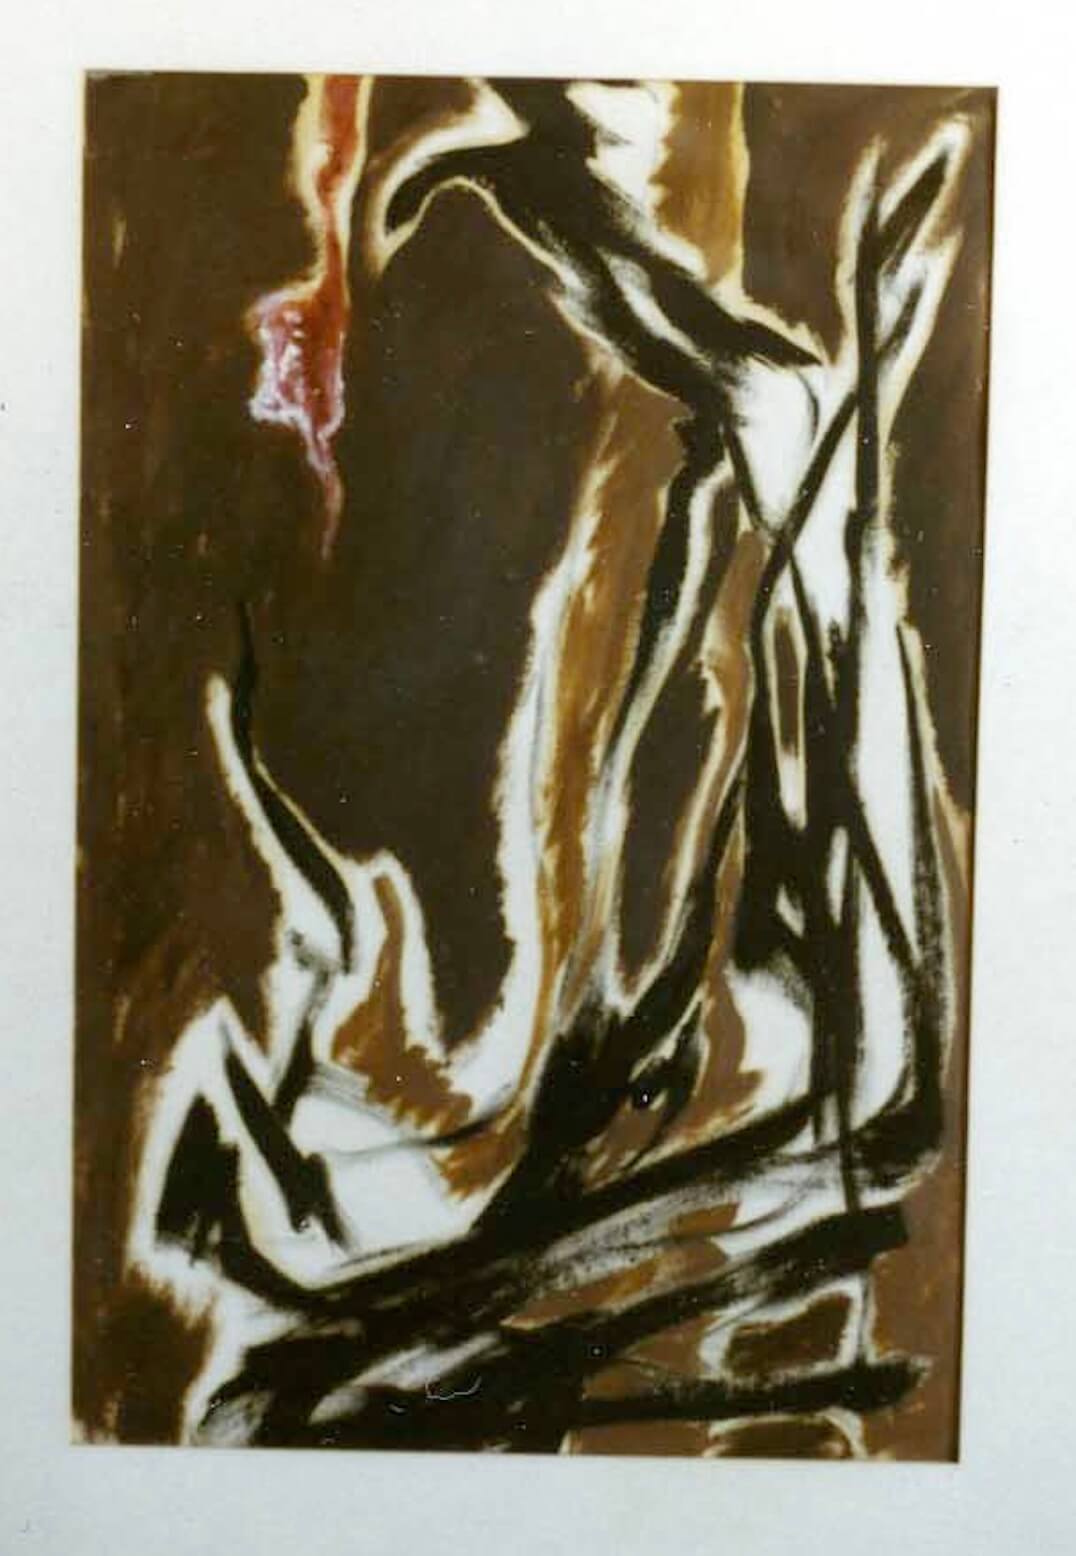 Abstract oil painting with brown, black, tan, red, and white paint